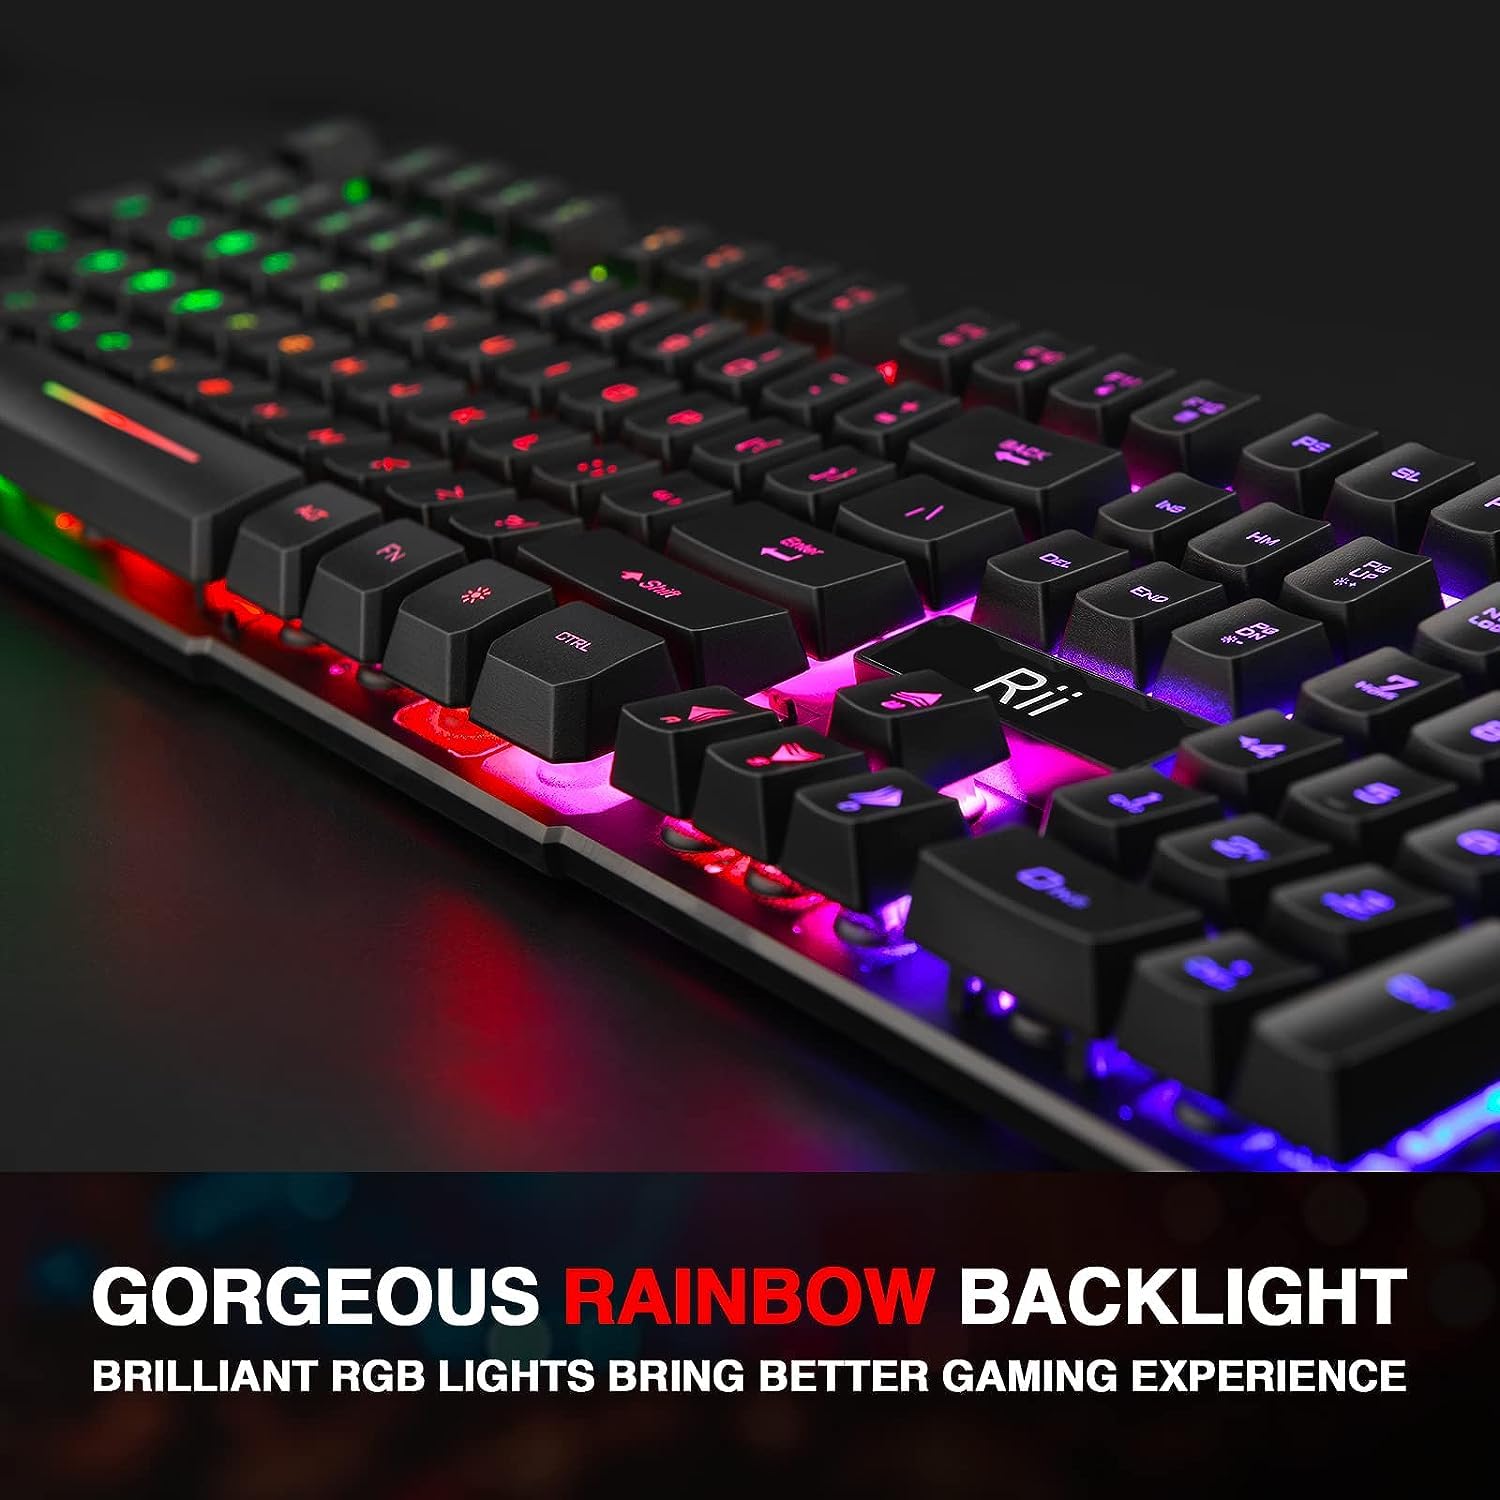 Rii RK100+ Multiple Color Rainbow LED Backlit Large Size USB Wired Mechanical Feeling Multimedia PC Gaming Keyboard,Office Keyboard for Working or Primer Gaming,Office Device